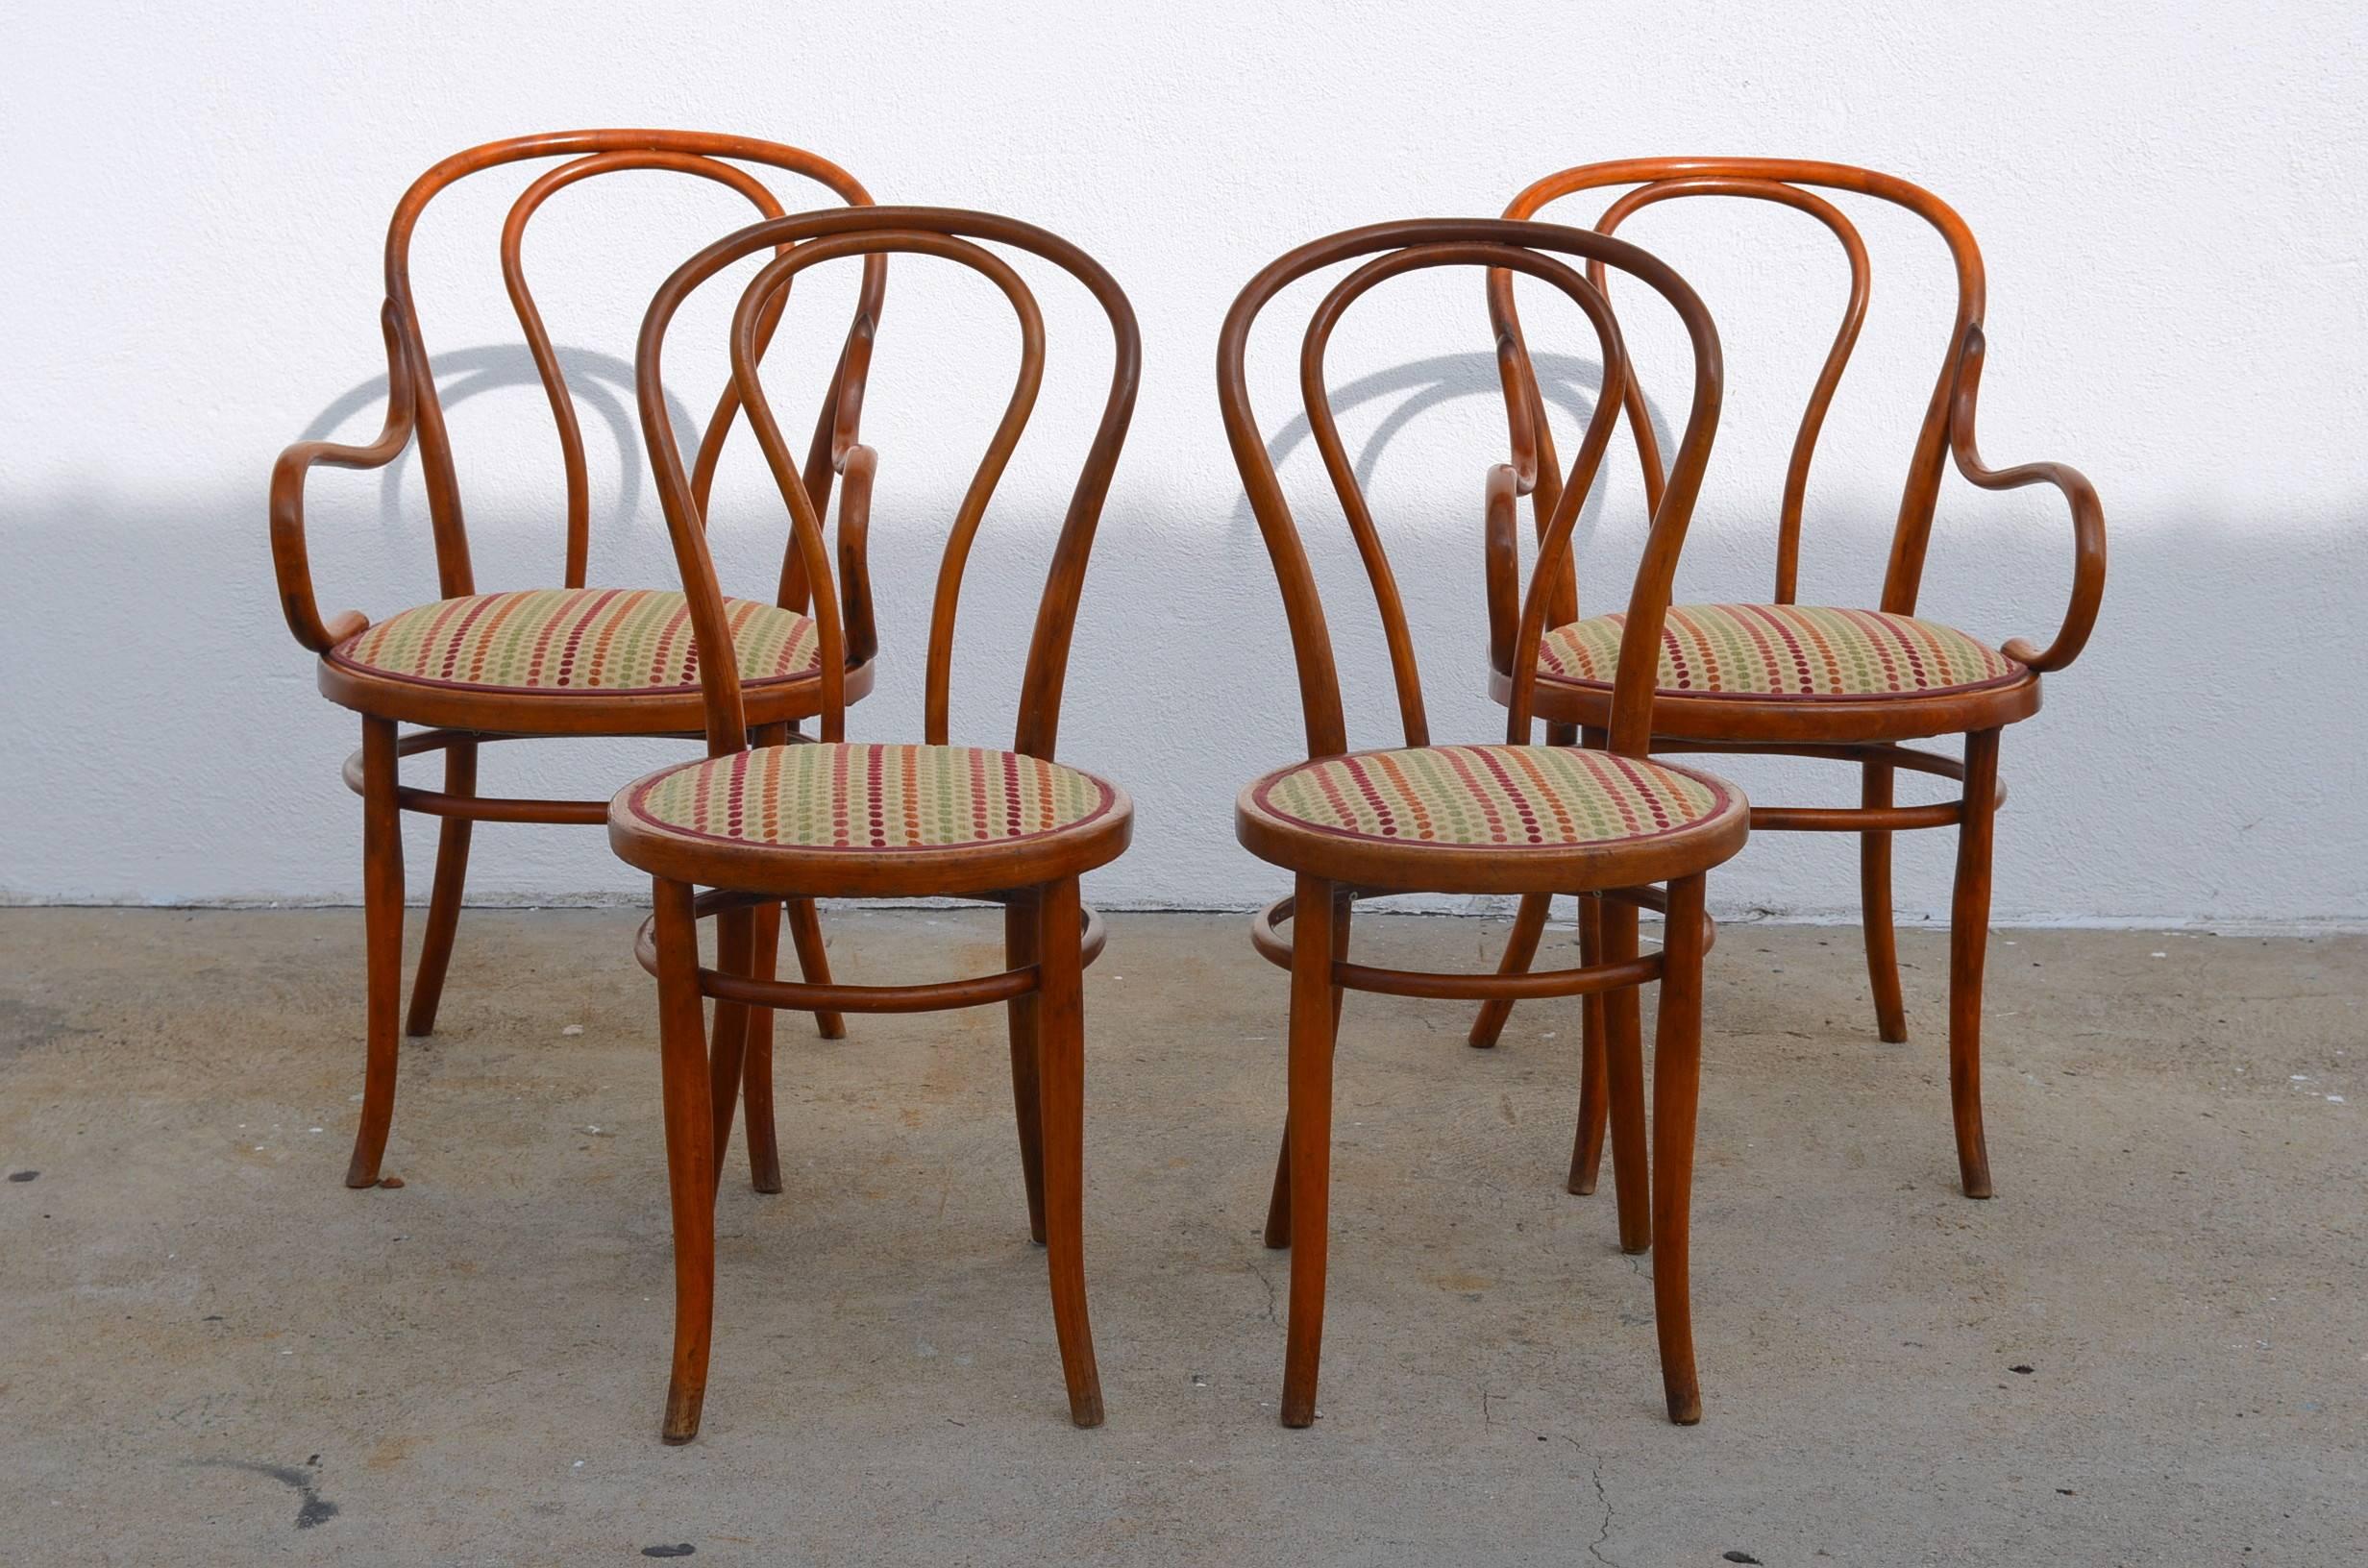 Set of four large slender bentwood dining set by Thonet, early 20th century European production. Seat fabric can be changed with C. O. M. (one yard) at no extra charge.

Dimensions:

Armchair 36 in. tall / 19 in. seat height, 23 in. wide, 27.5